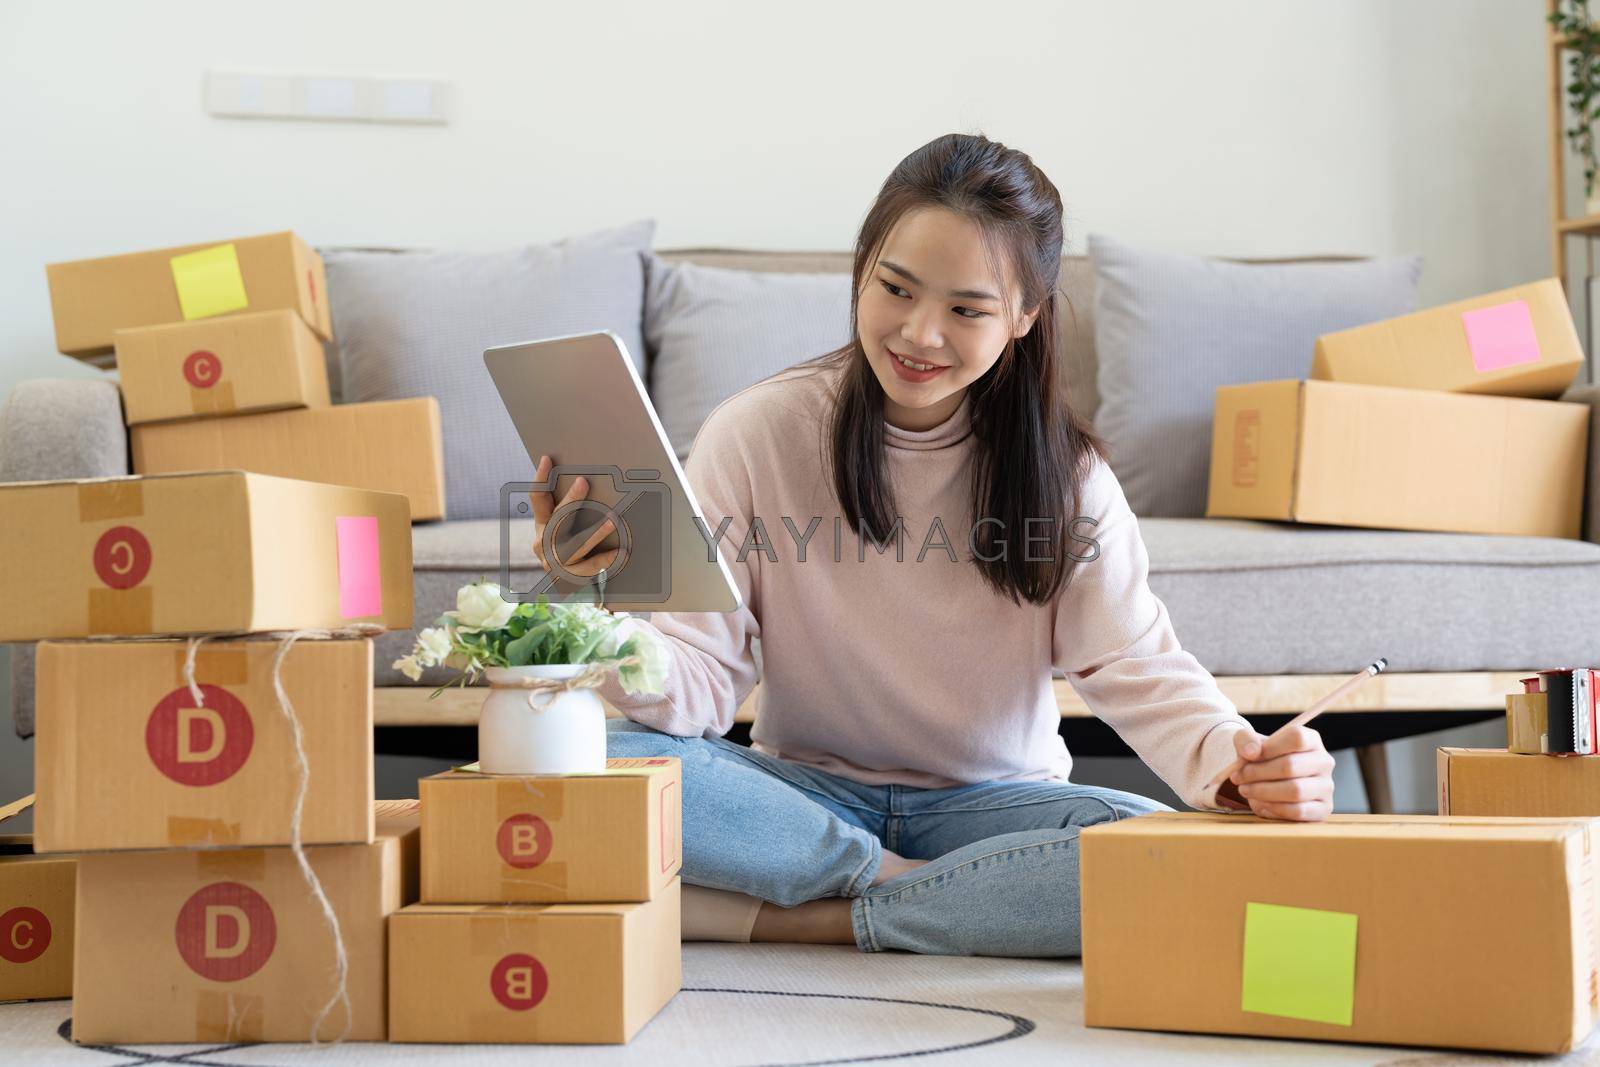 Royalty free image of Female online store small business owner entrepreneur seller packing shipping ecommerce box checking website retail order using laptop preparing delivery parcel. by nateemee